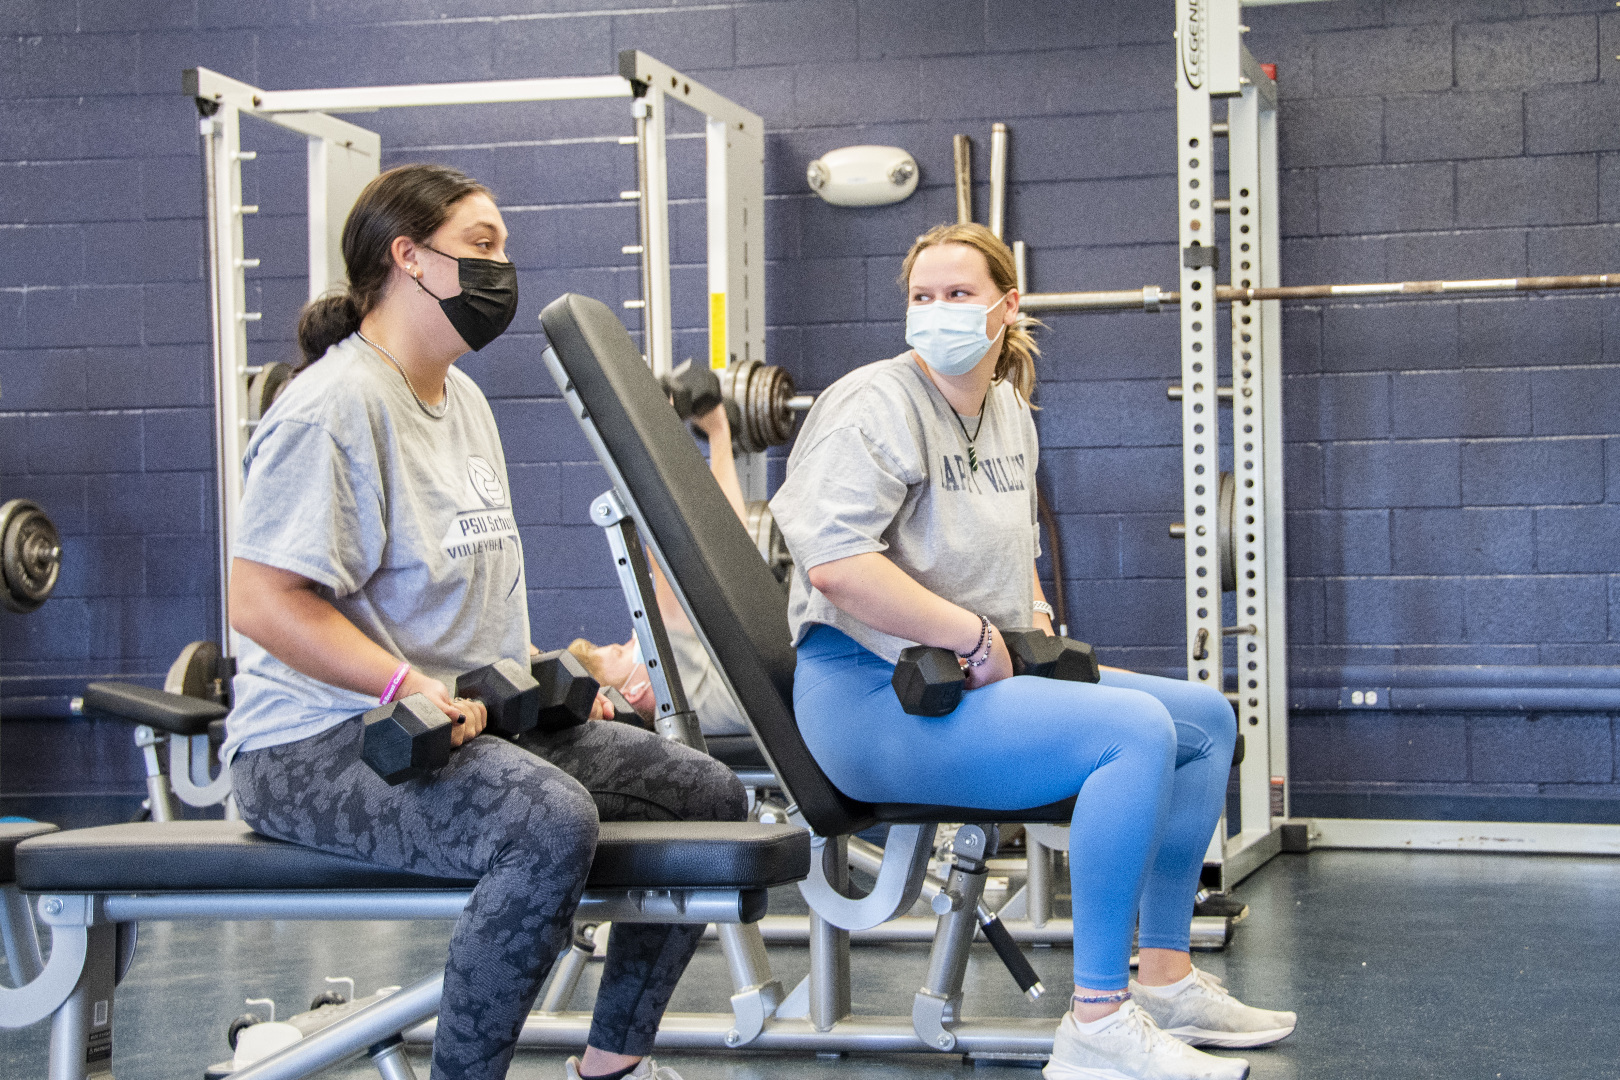 Two Penn State Schuylkill students talk in the fitness center